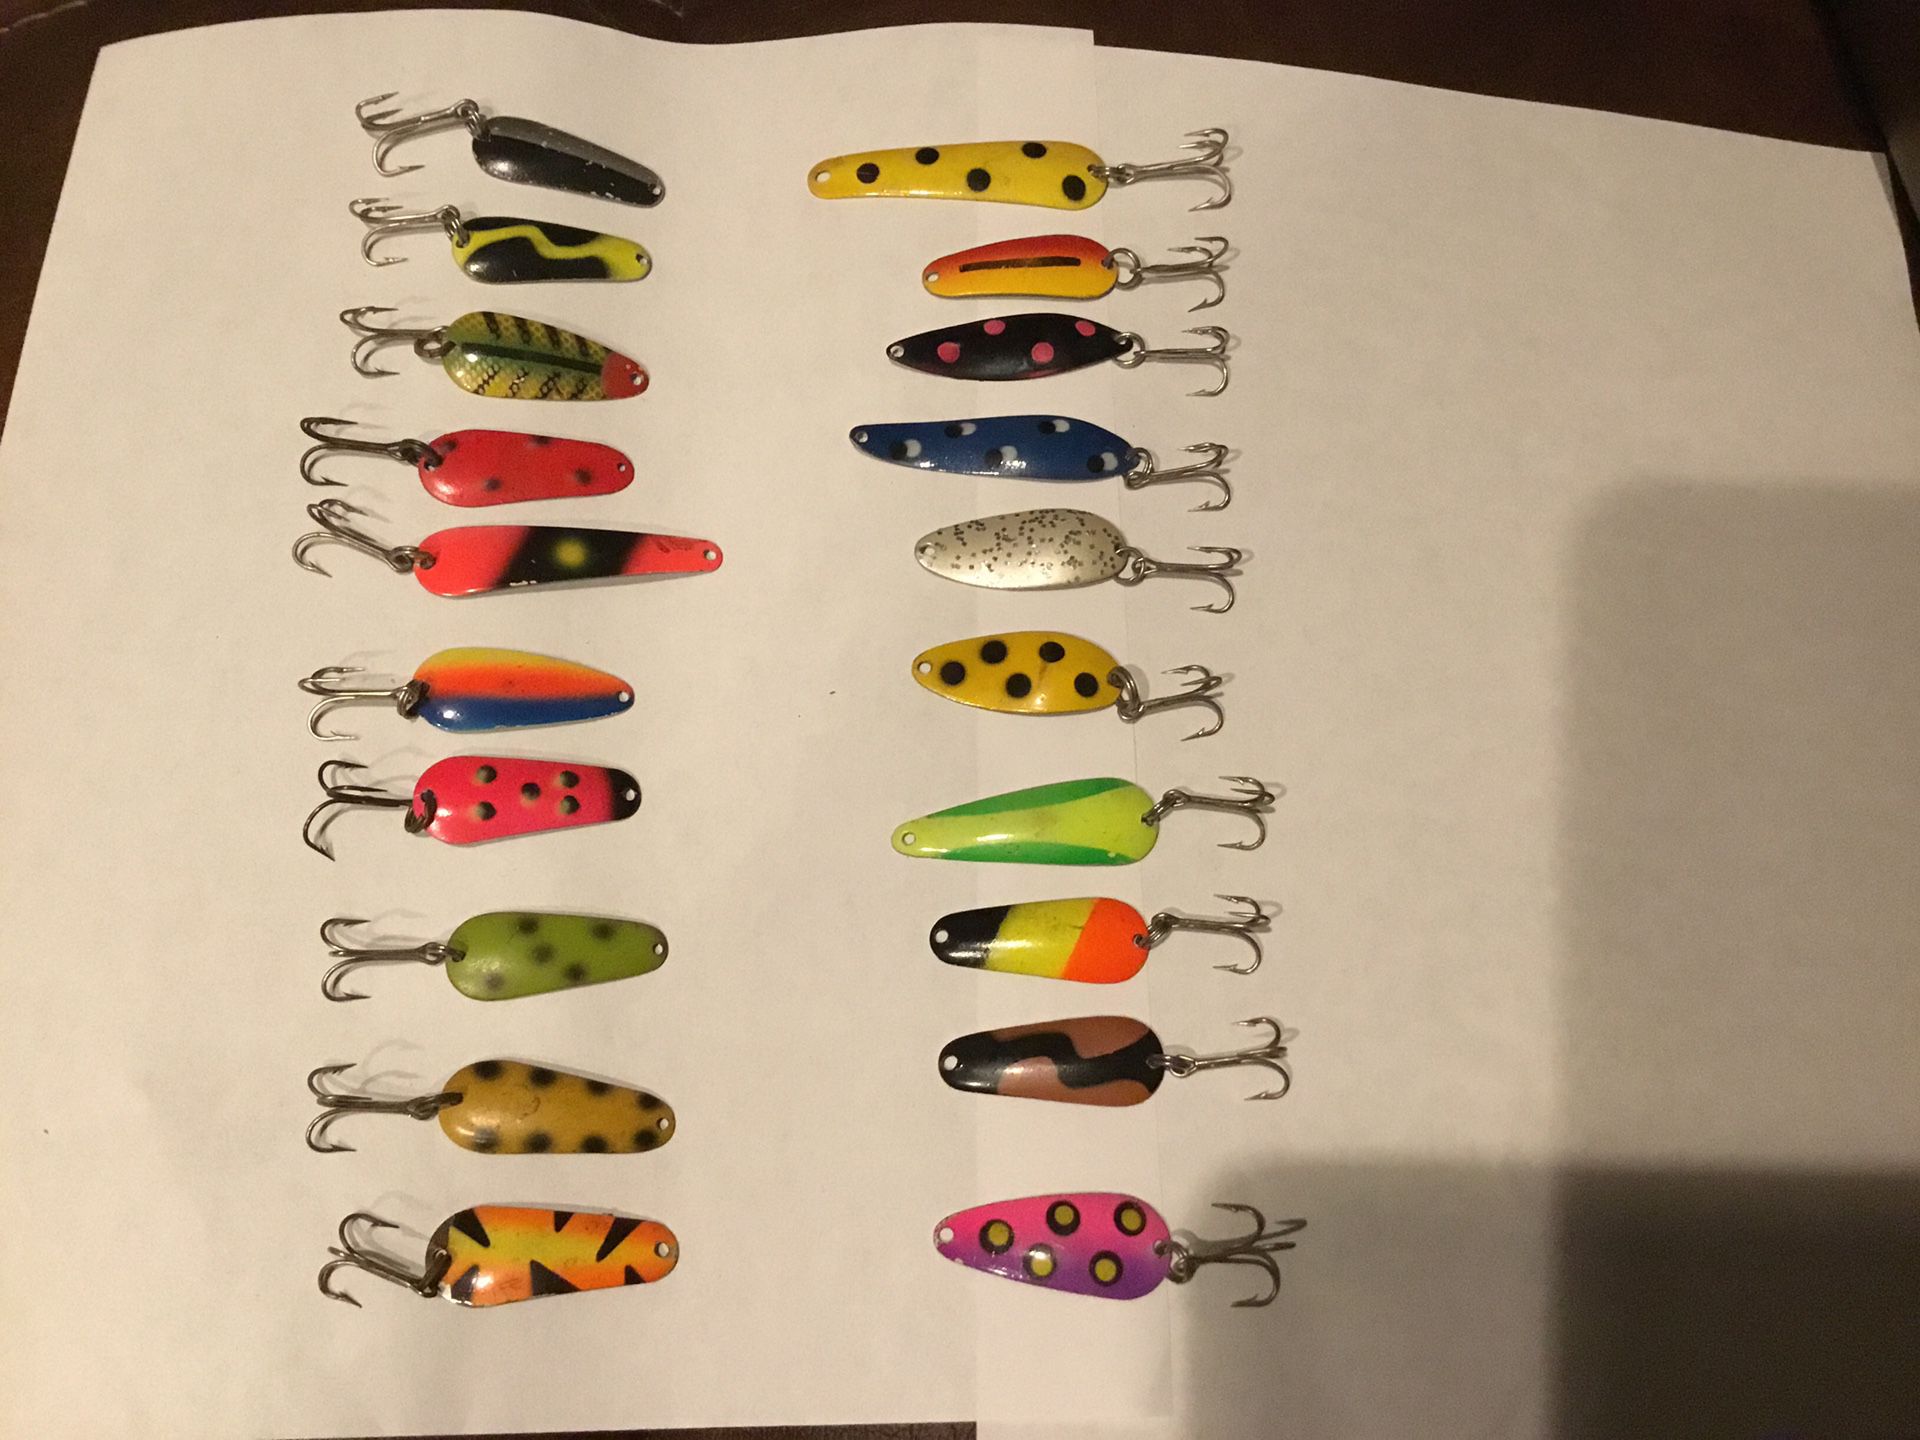 20 ct assrt sizes and shapes of very colorful walleye spoon fishing lures, made in the 1980s in Detroit mi